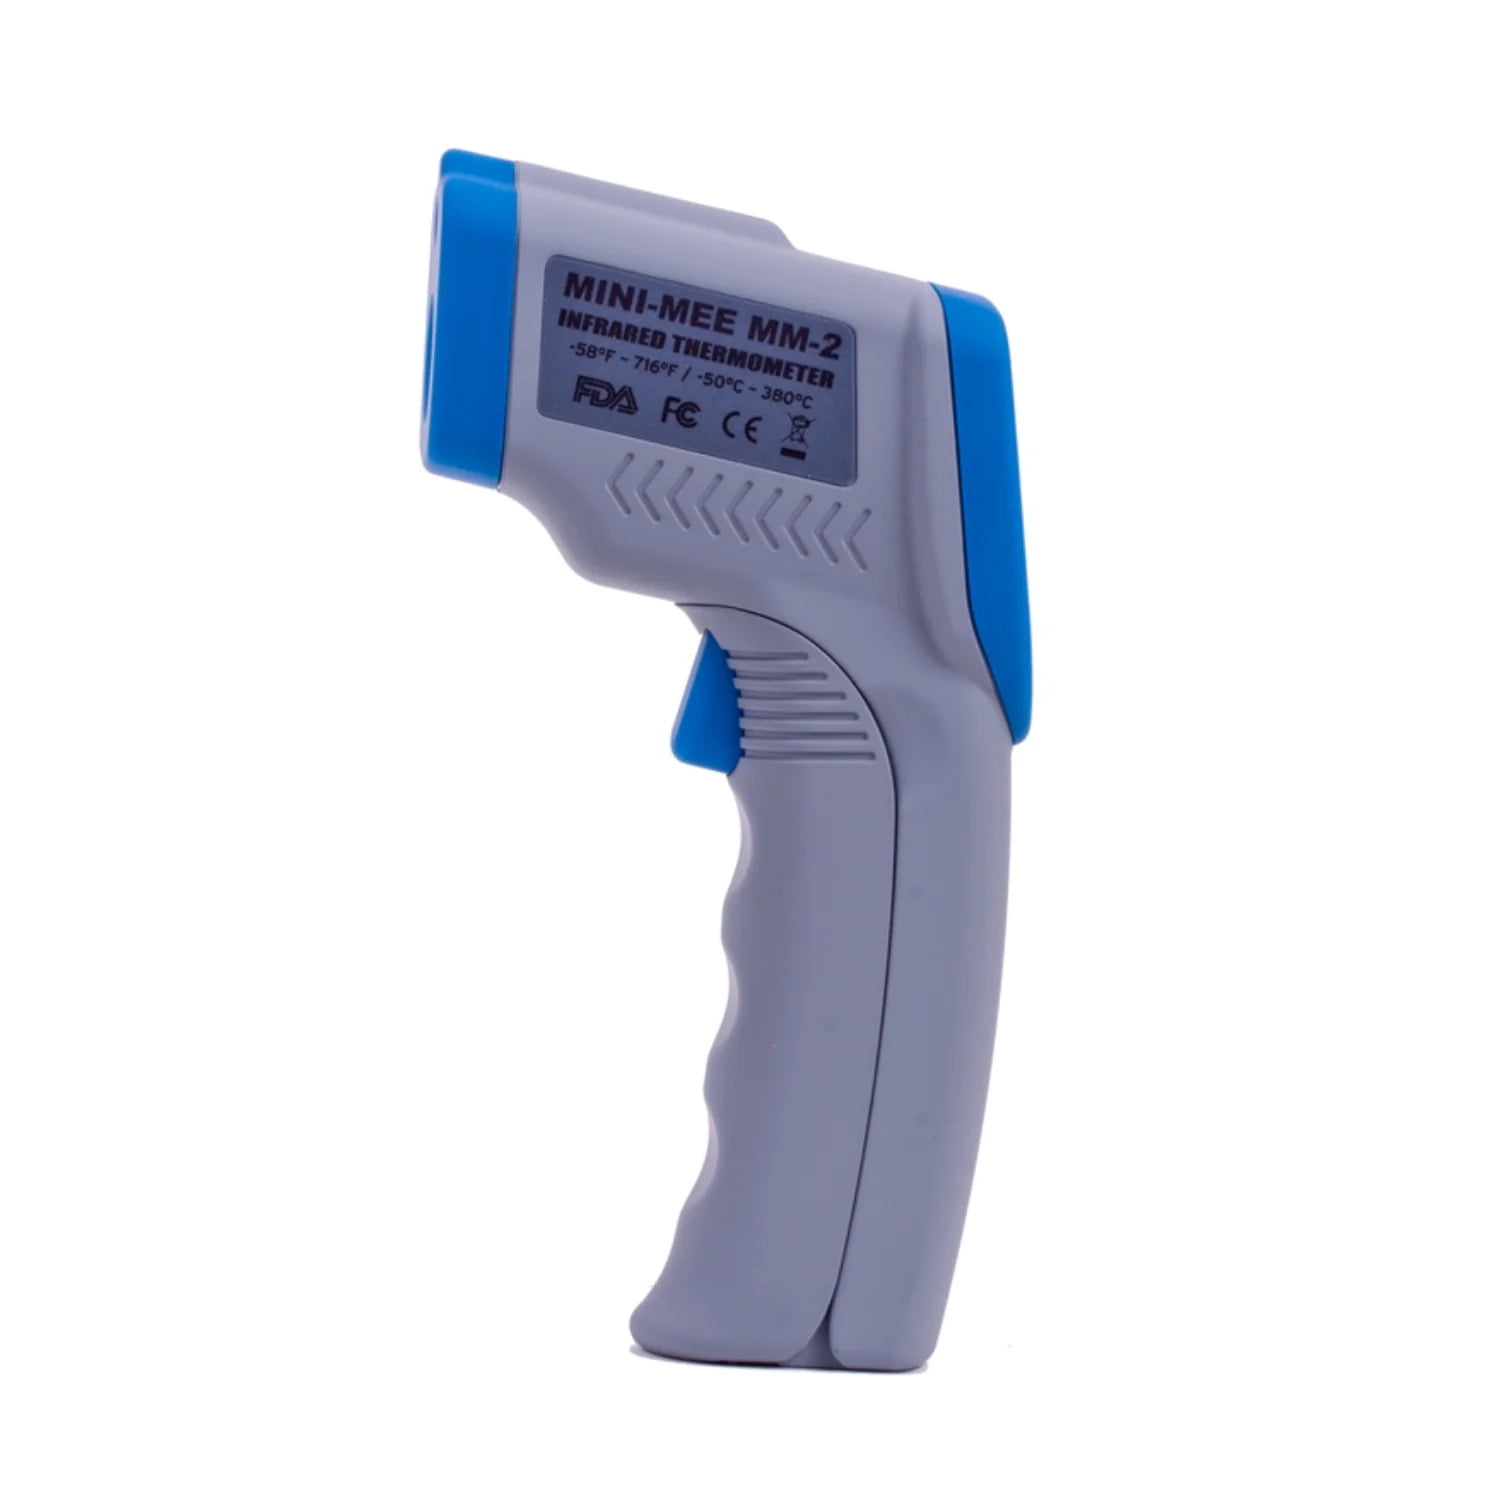 Exo terra infrared thermometer (temperature gun) review 